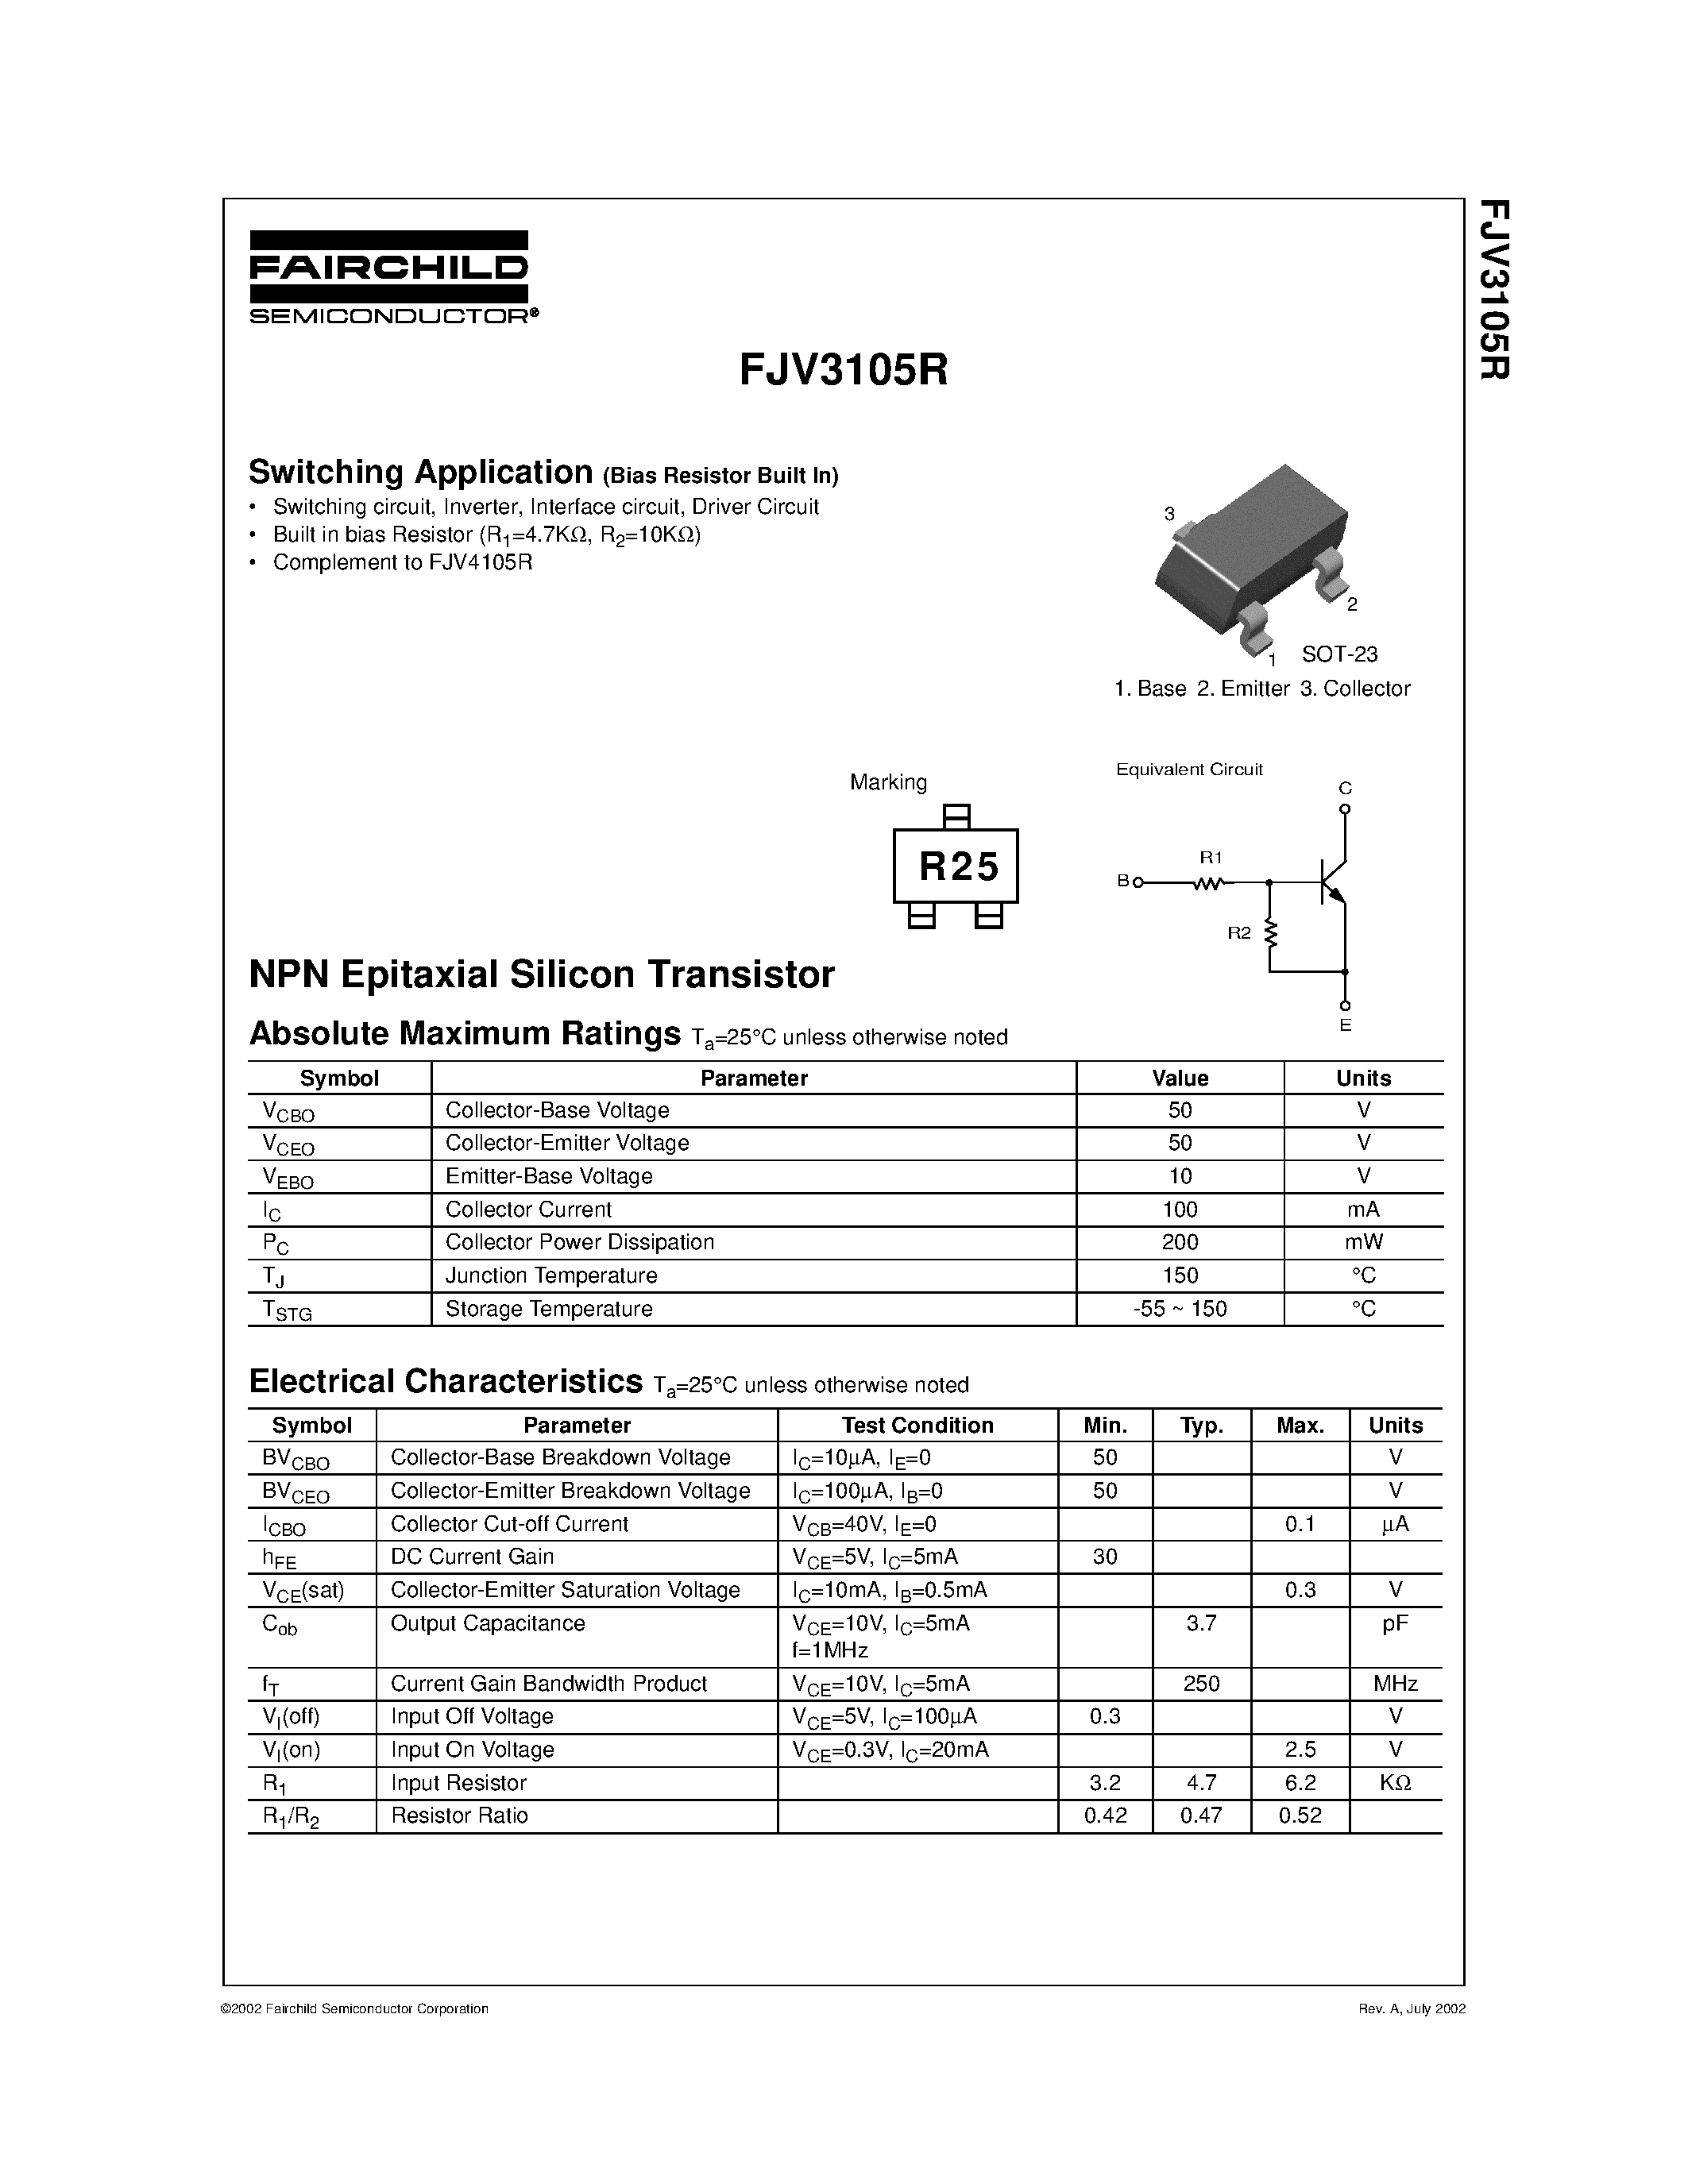 Datasheet FJV3105R - NPN Epitaxial Silicon Transistor page 1